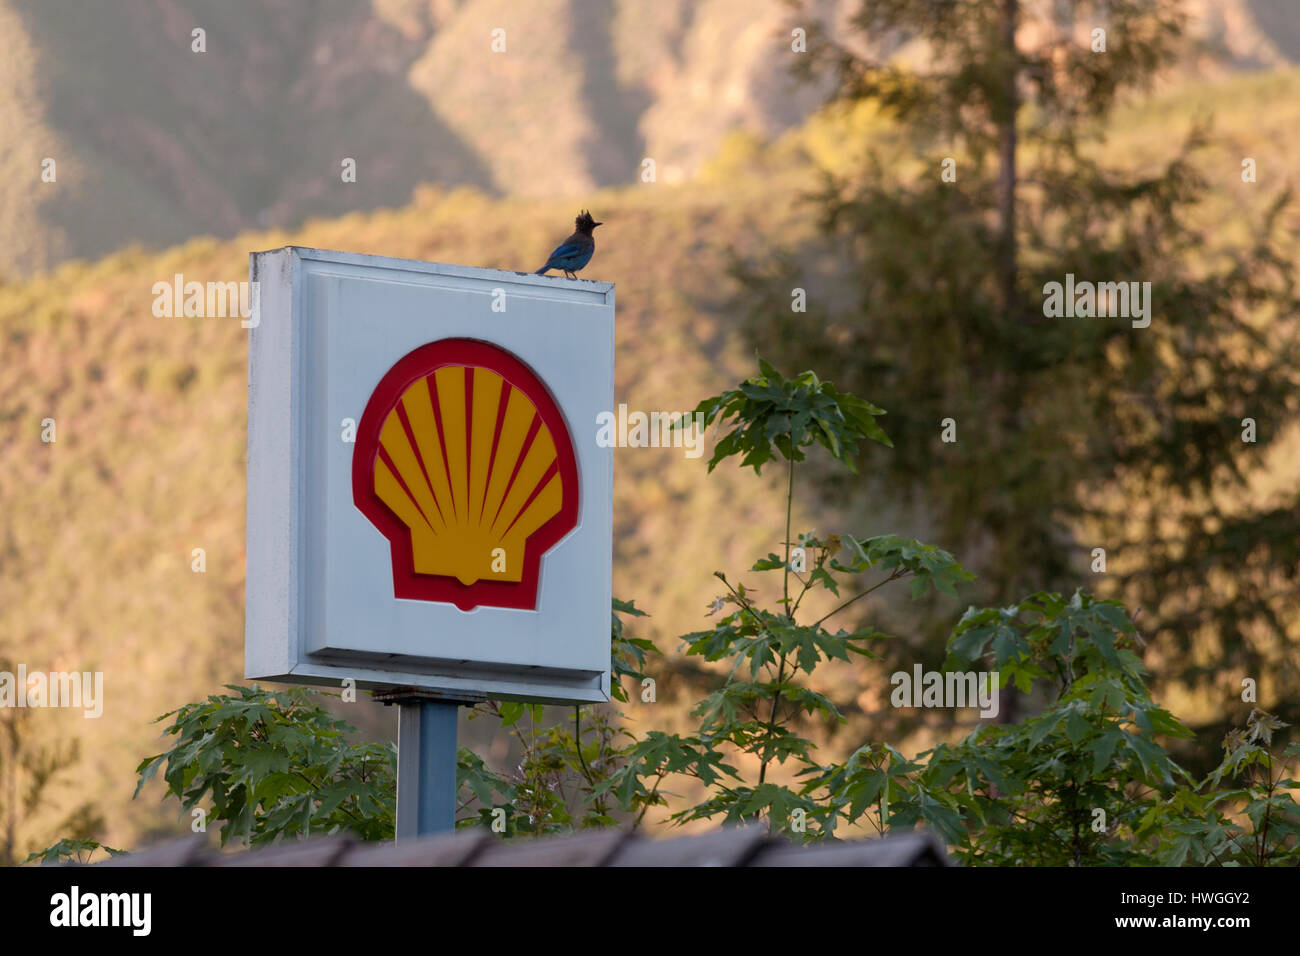 A bird rests on the Shell petroleum sign Stock Photo